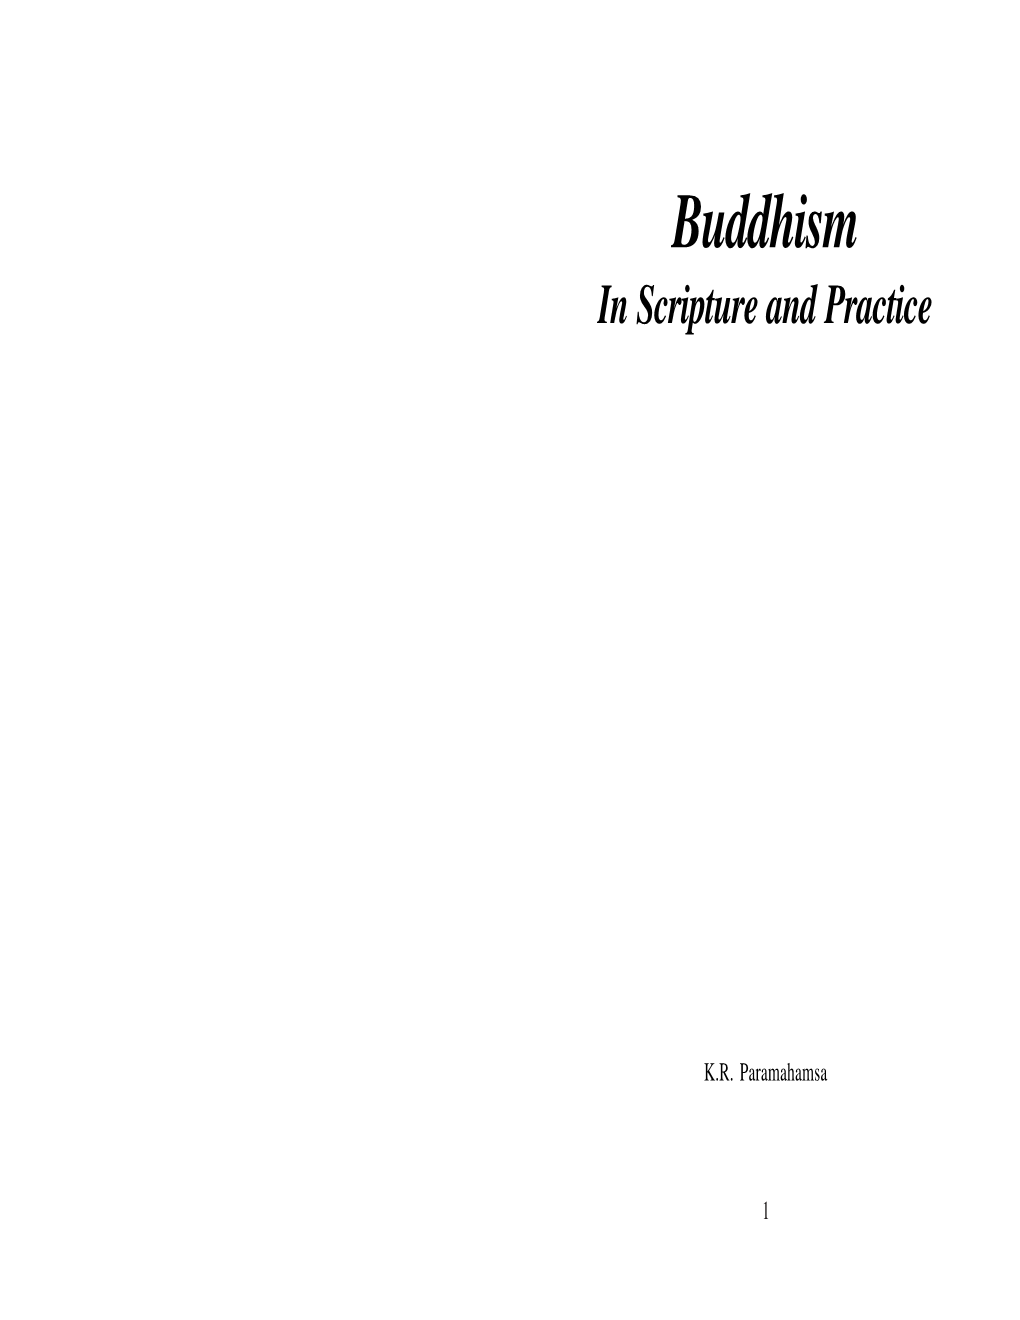 Buddhism in Scripture and Practice